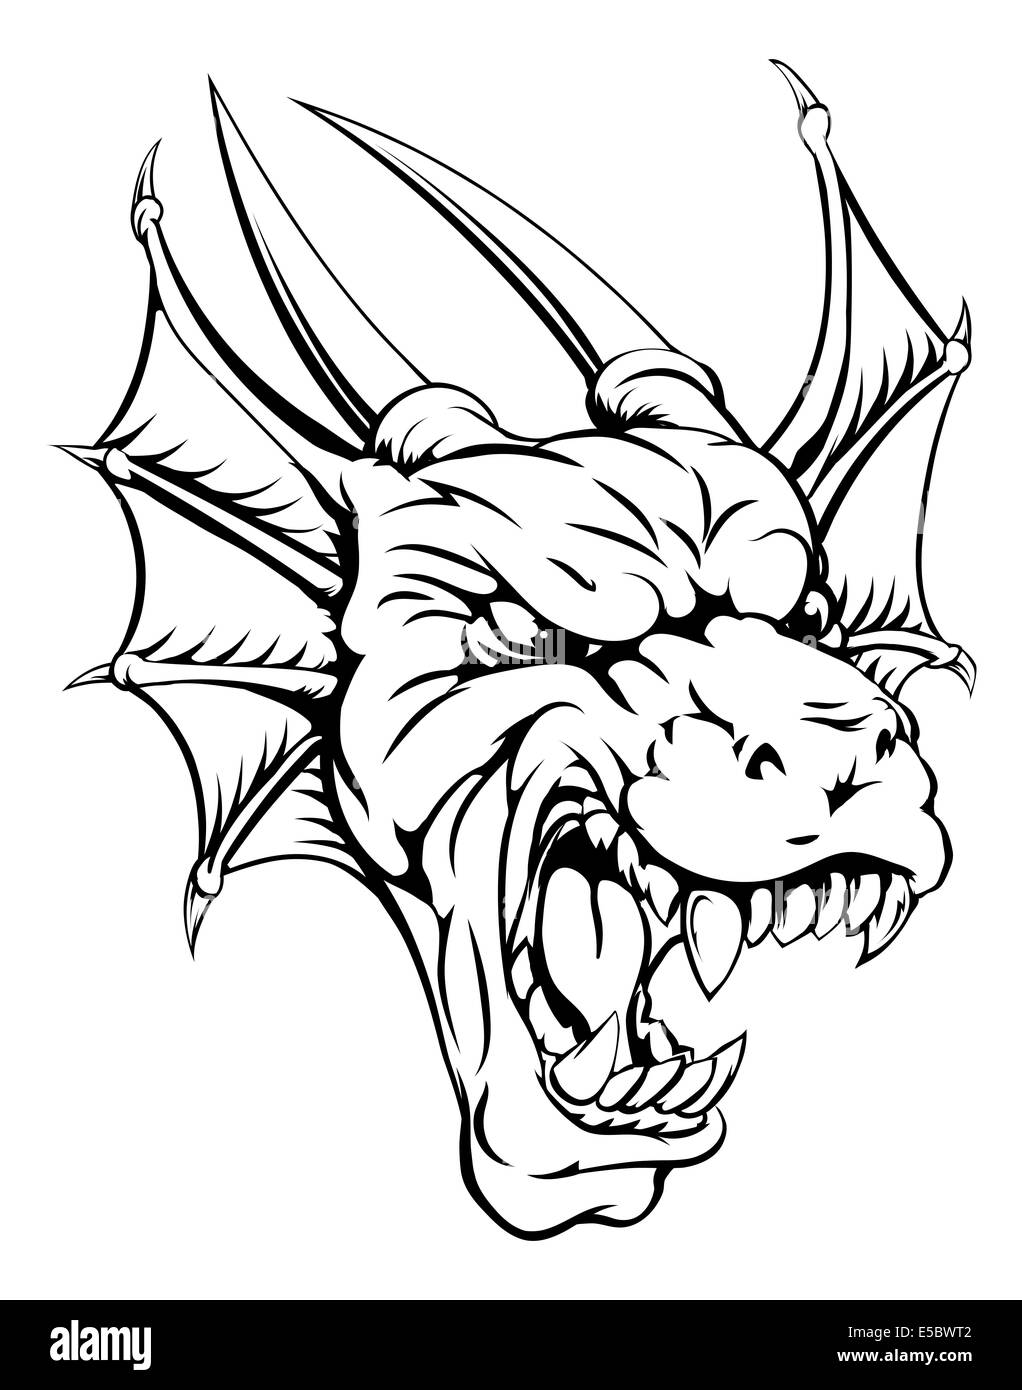 An illustration of a mean looking dragon mascot roaring Stock Photo